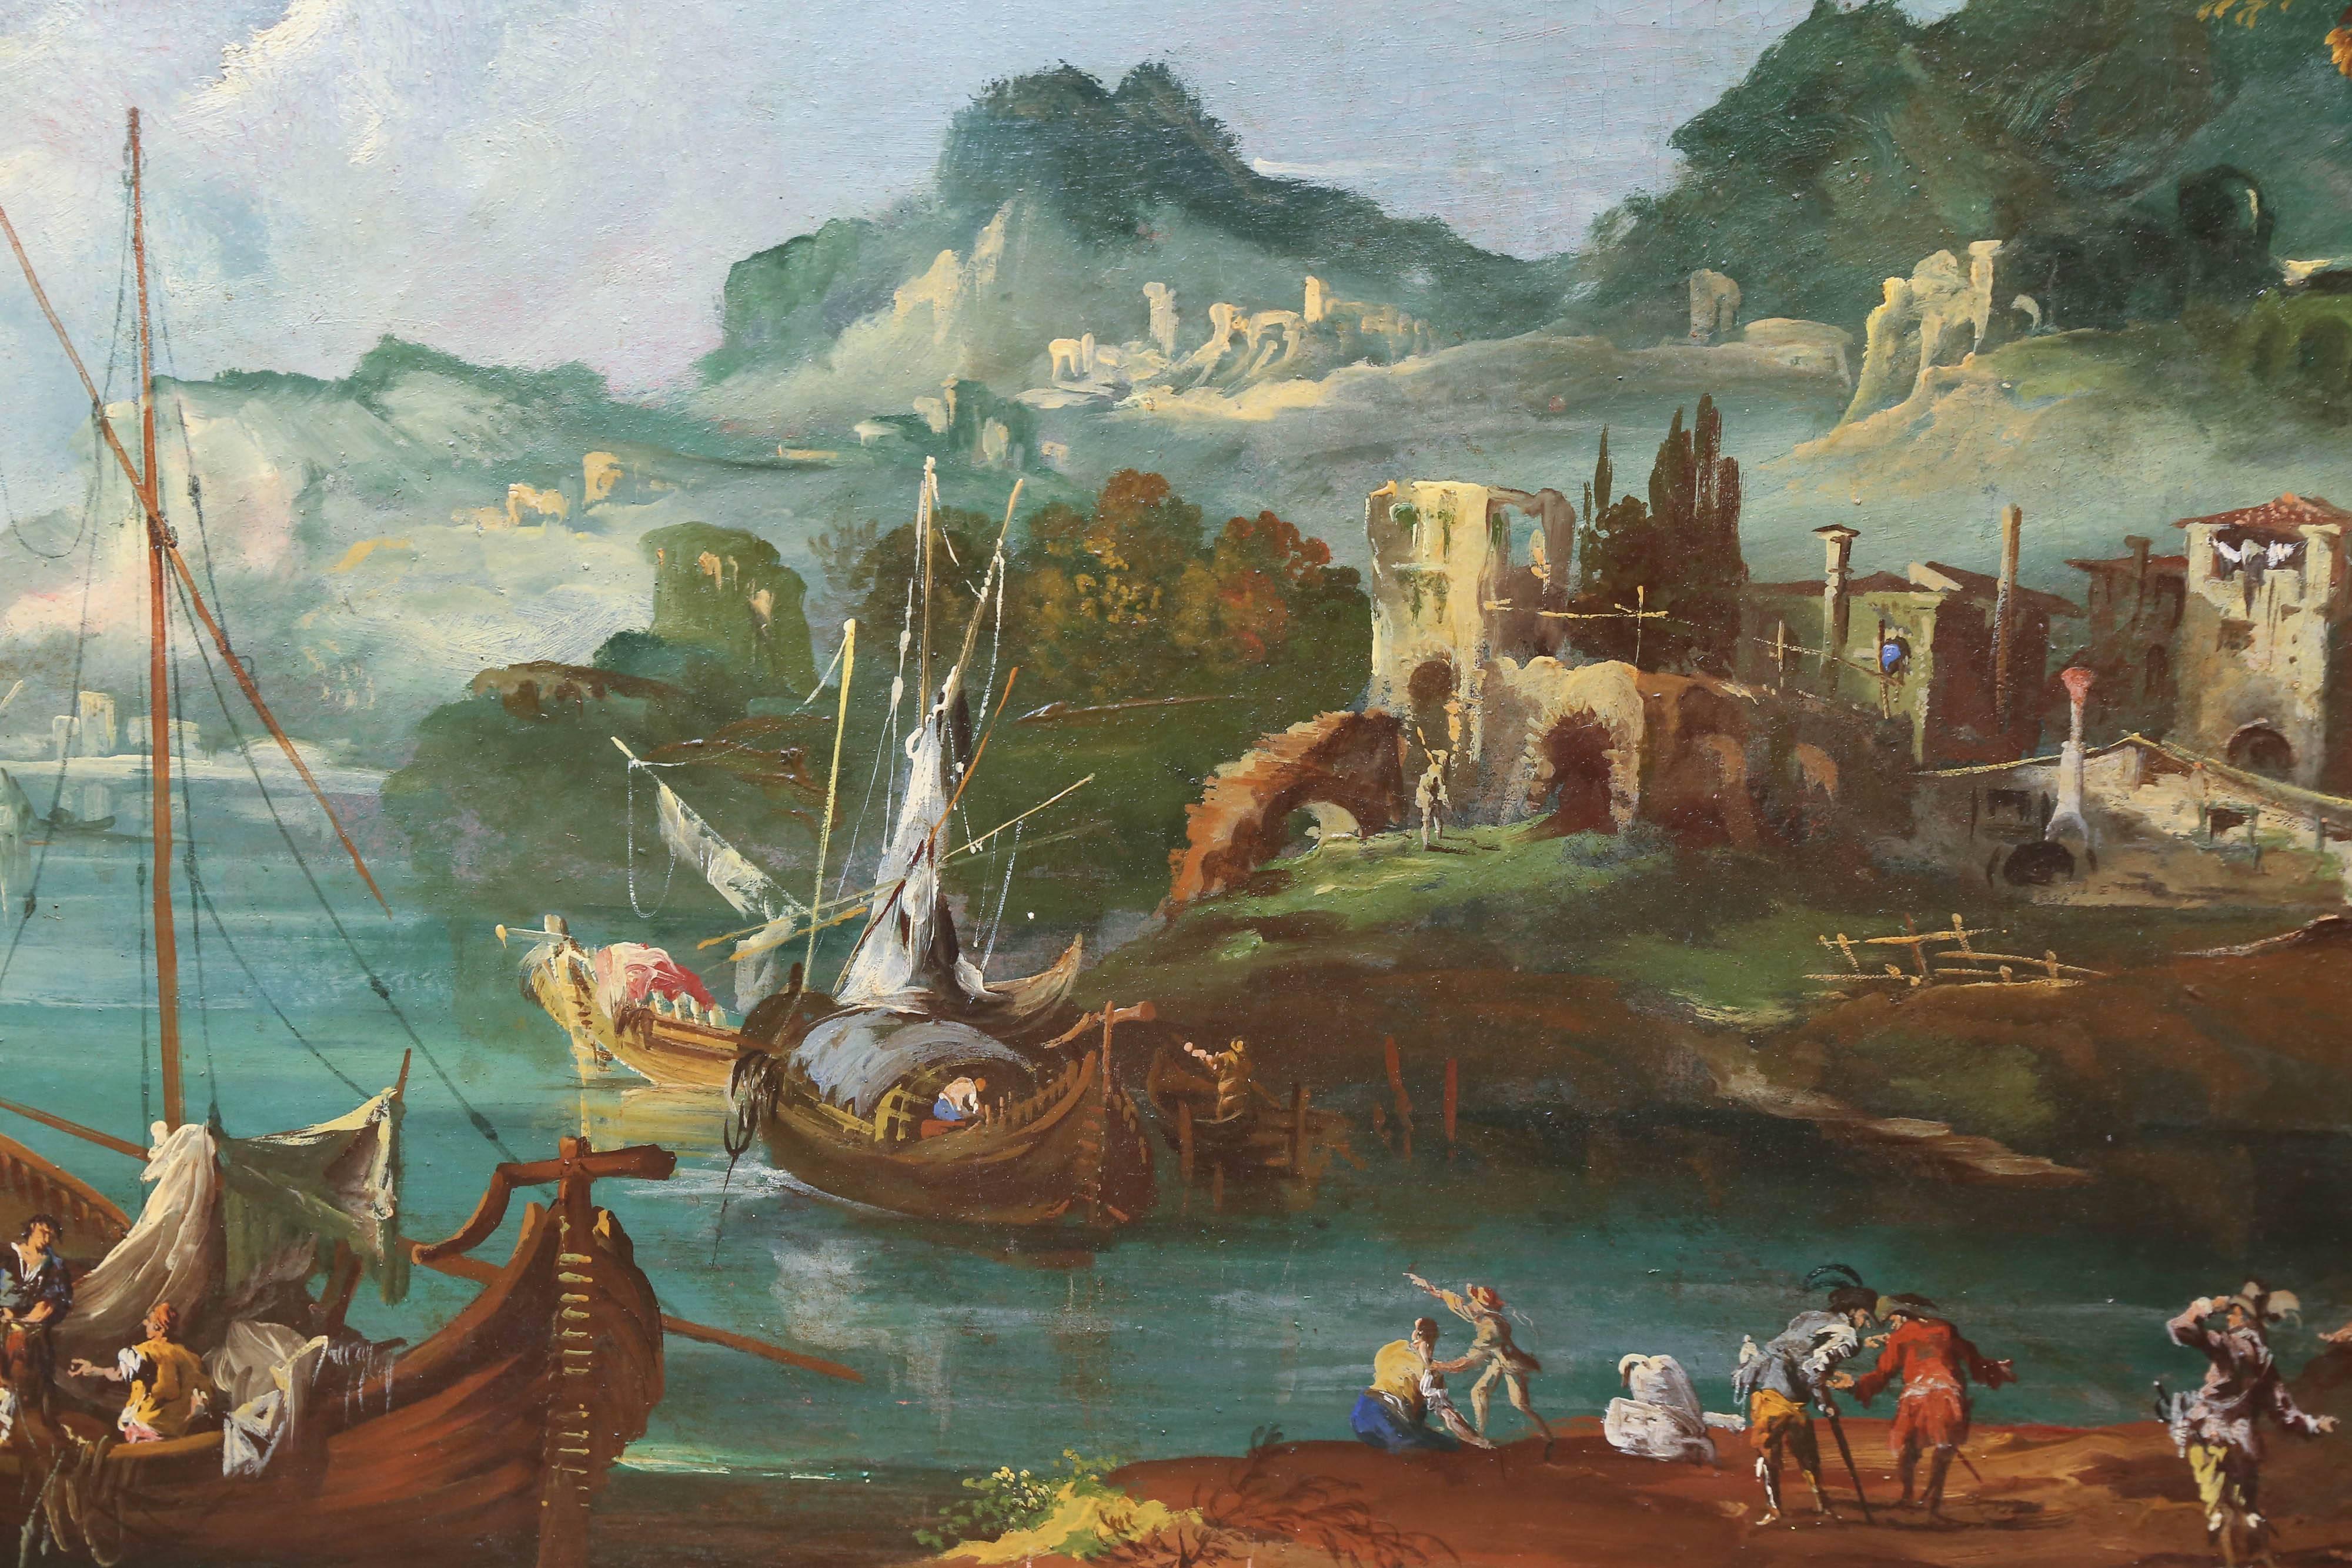 Serpentine form painting in original giltwood frame
Depicting a harbor scene of boats, village people and
Their homes and surroundings.